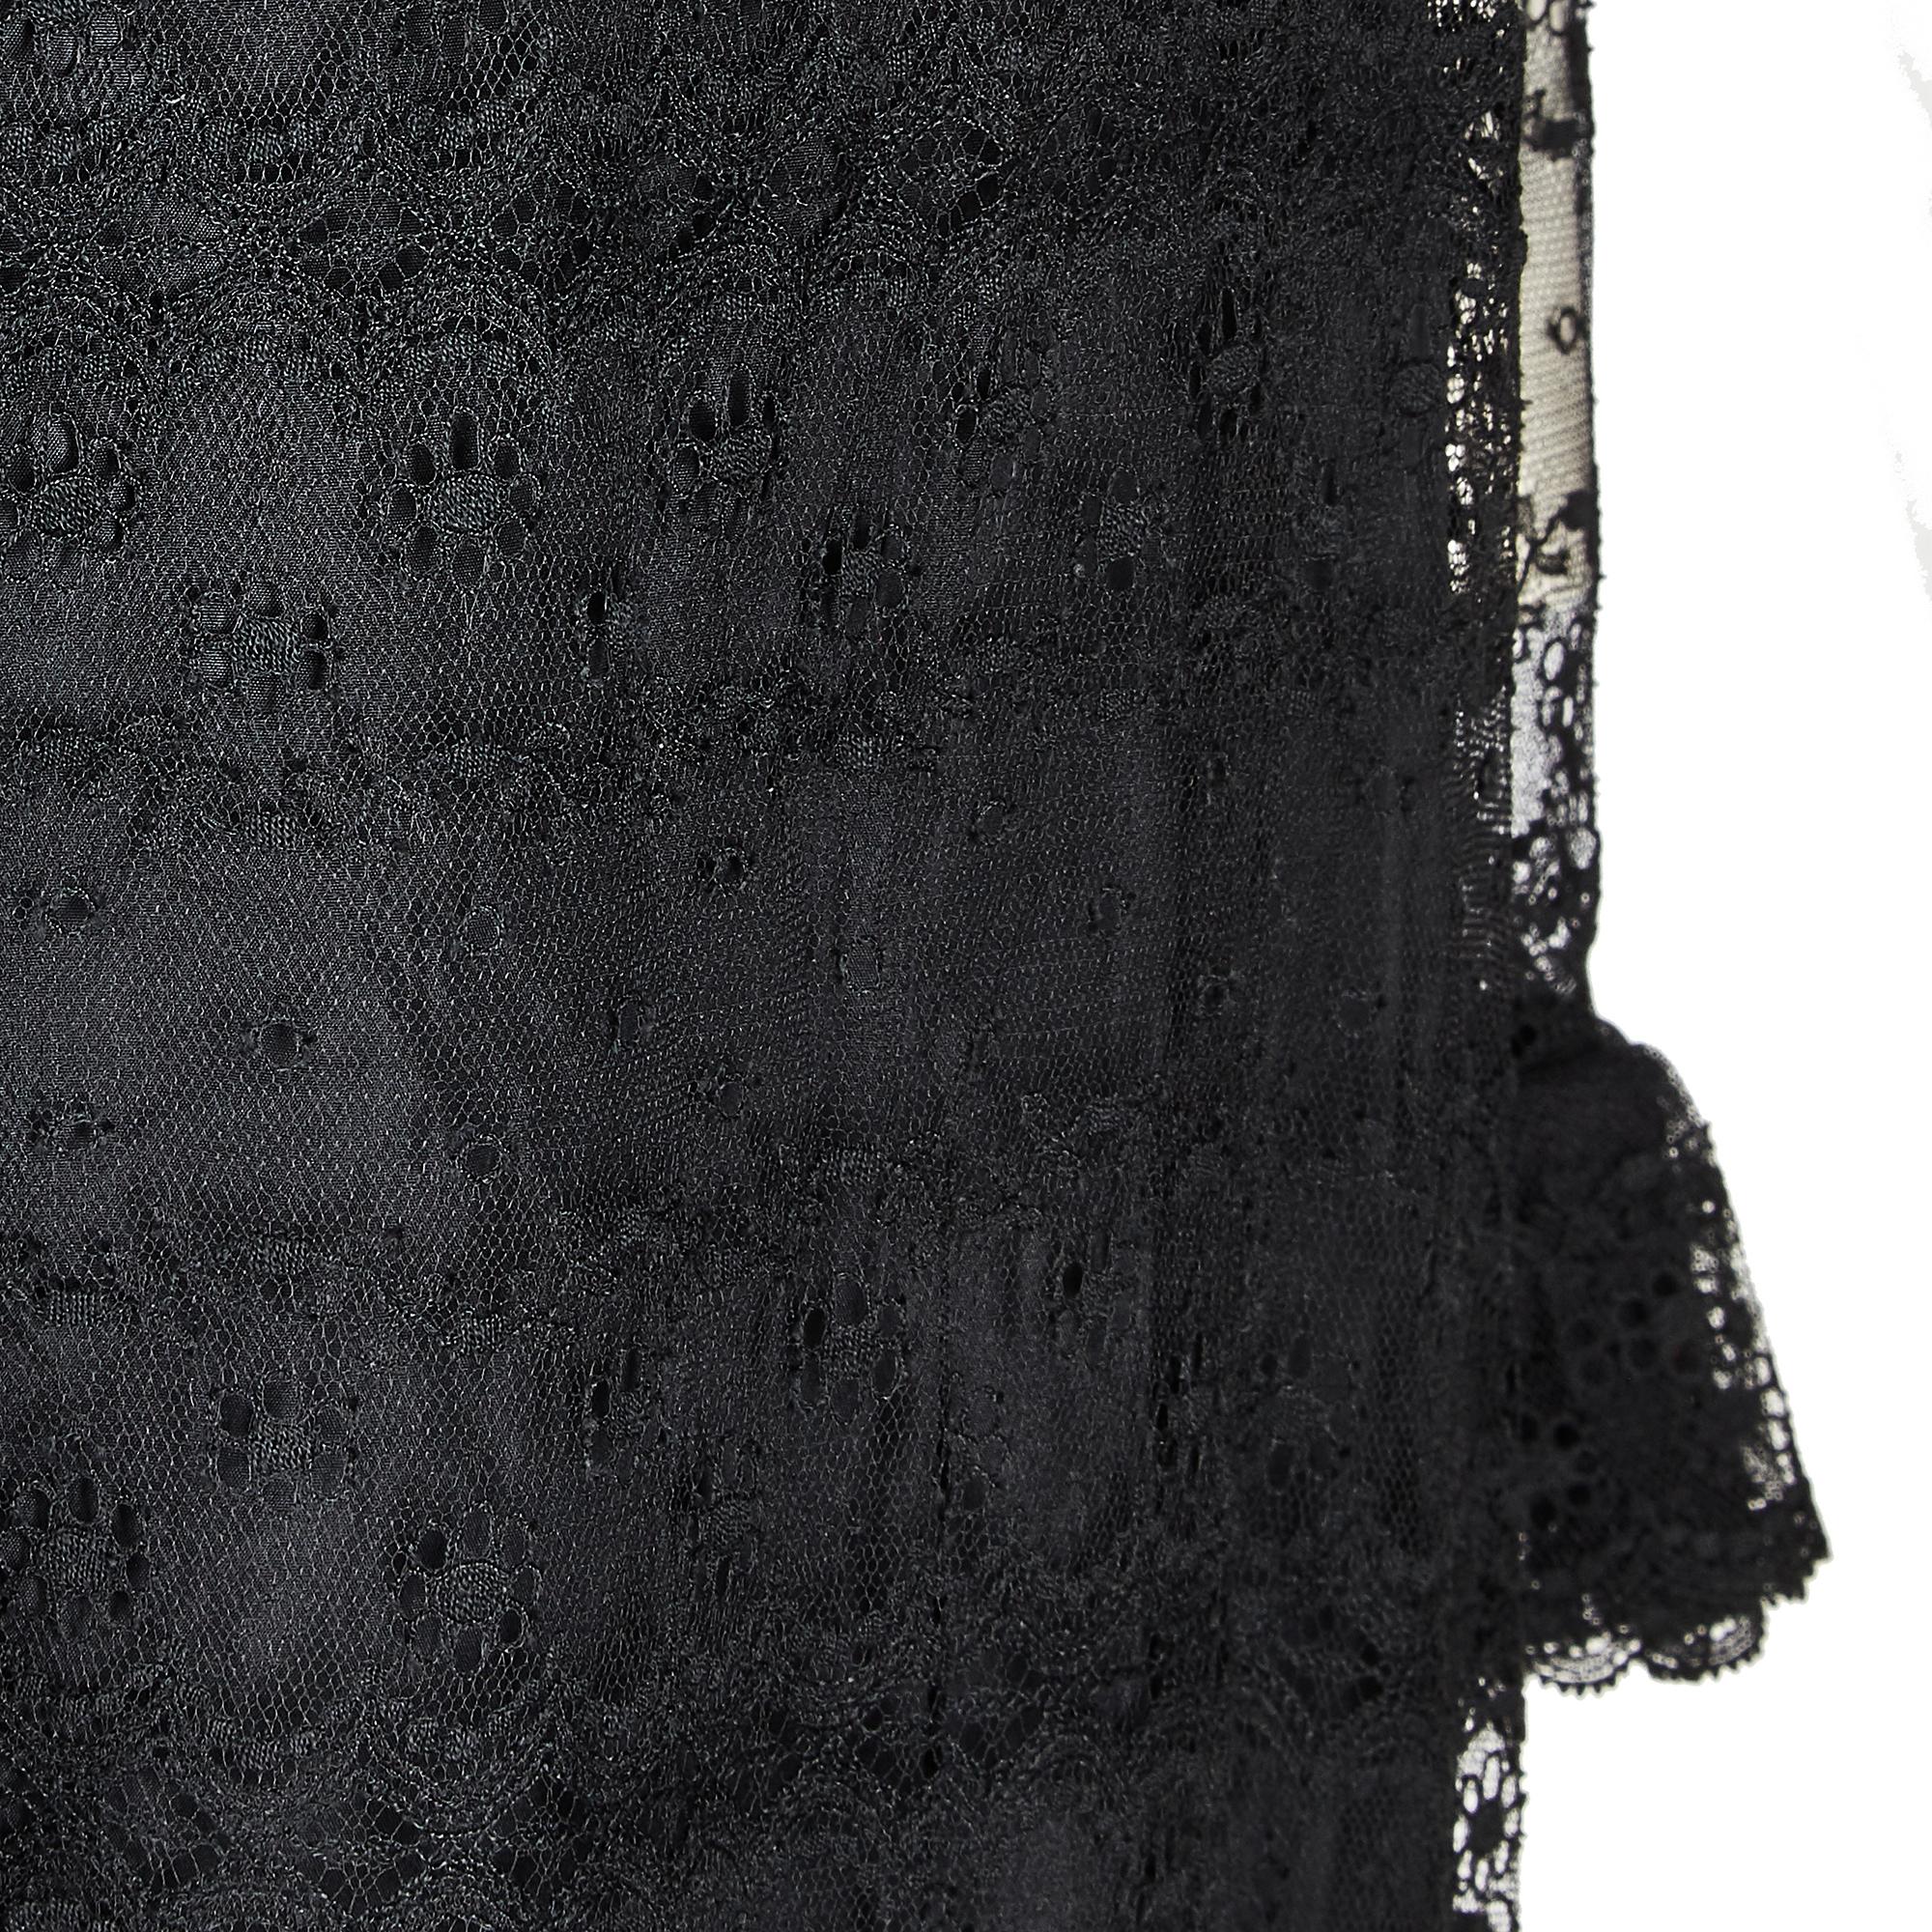 Women's 1971 Documented Madame Gres Haute Couture Black Lace Dress For Sale